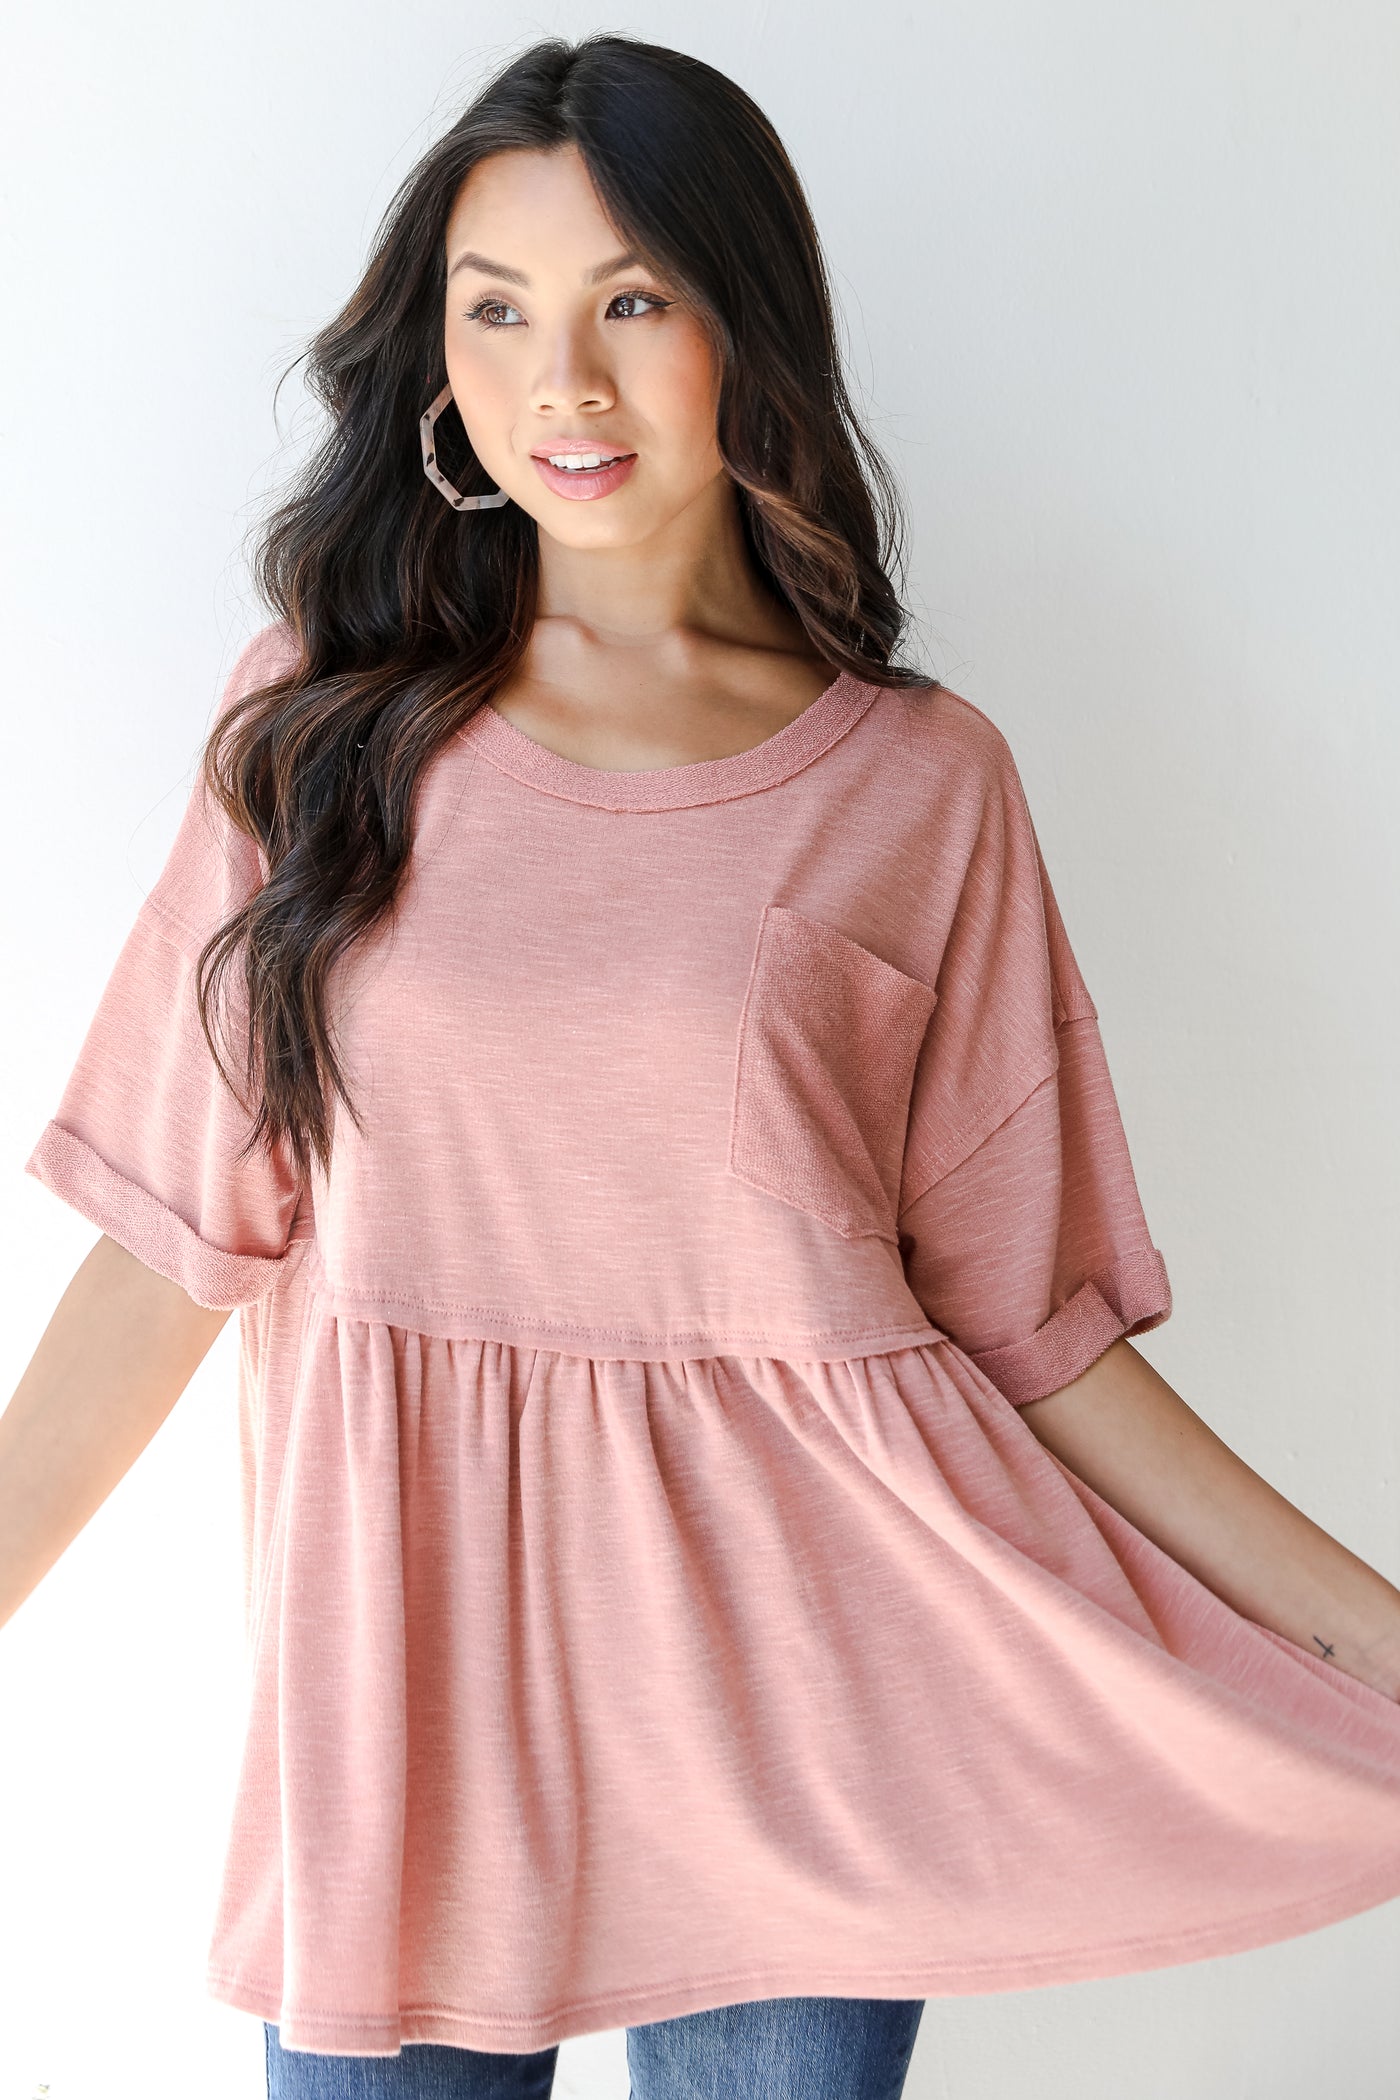 Babydoll Tee from dress up